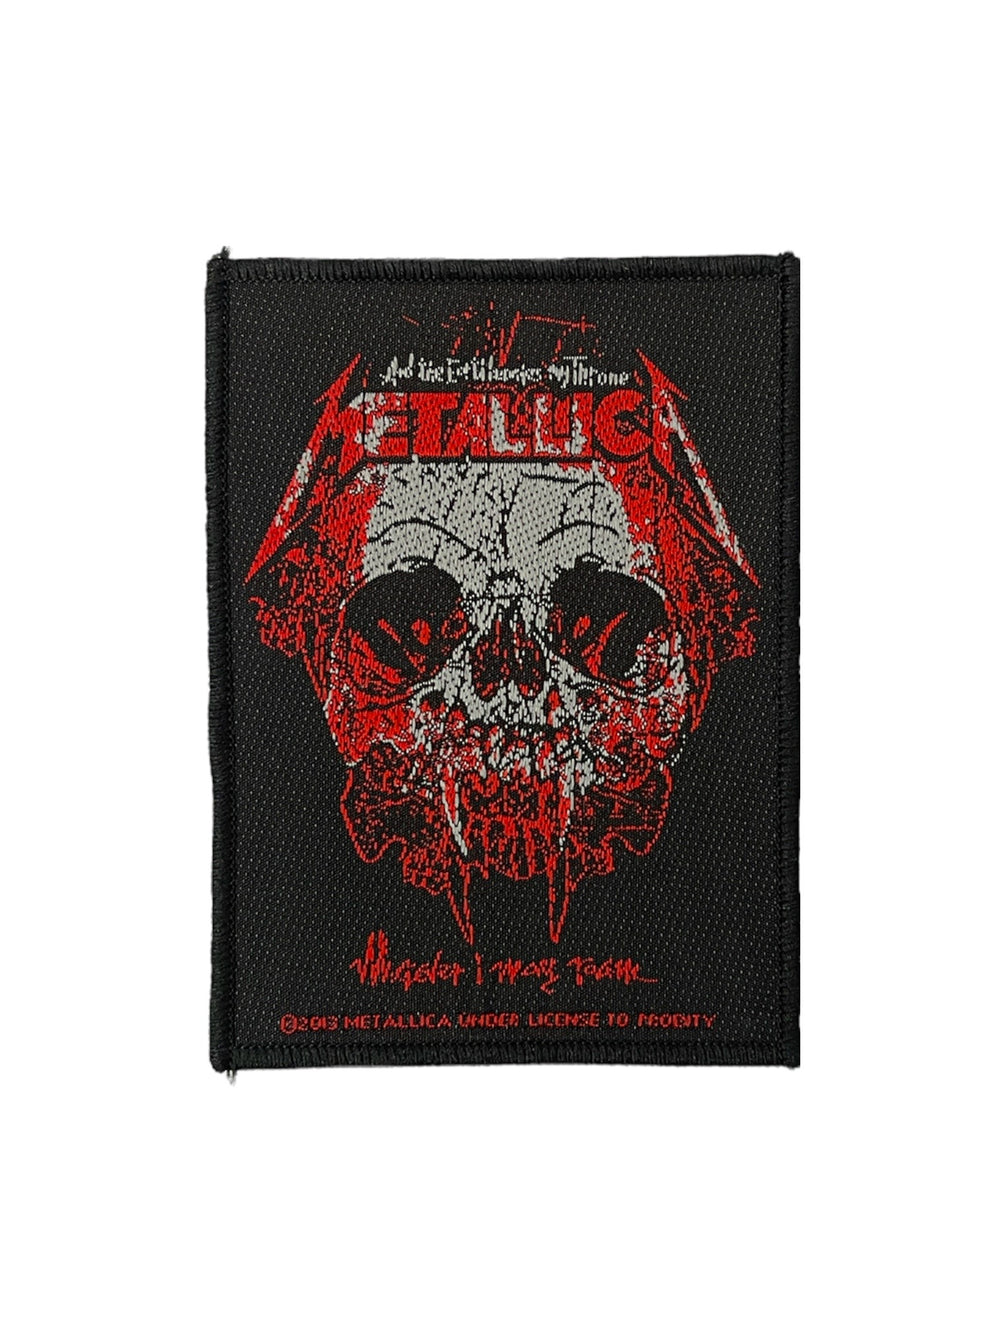 Metallica Wherever I May Roam Rectangle Official Woven Patch Brand New